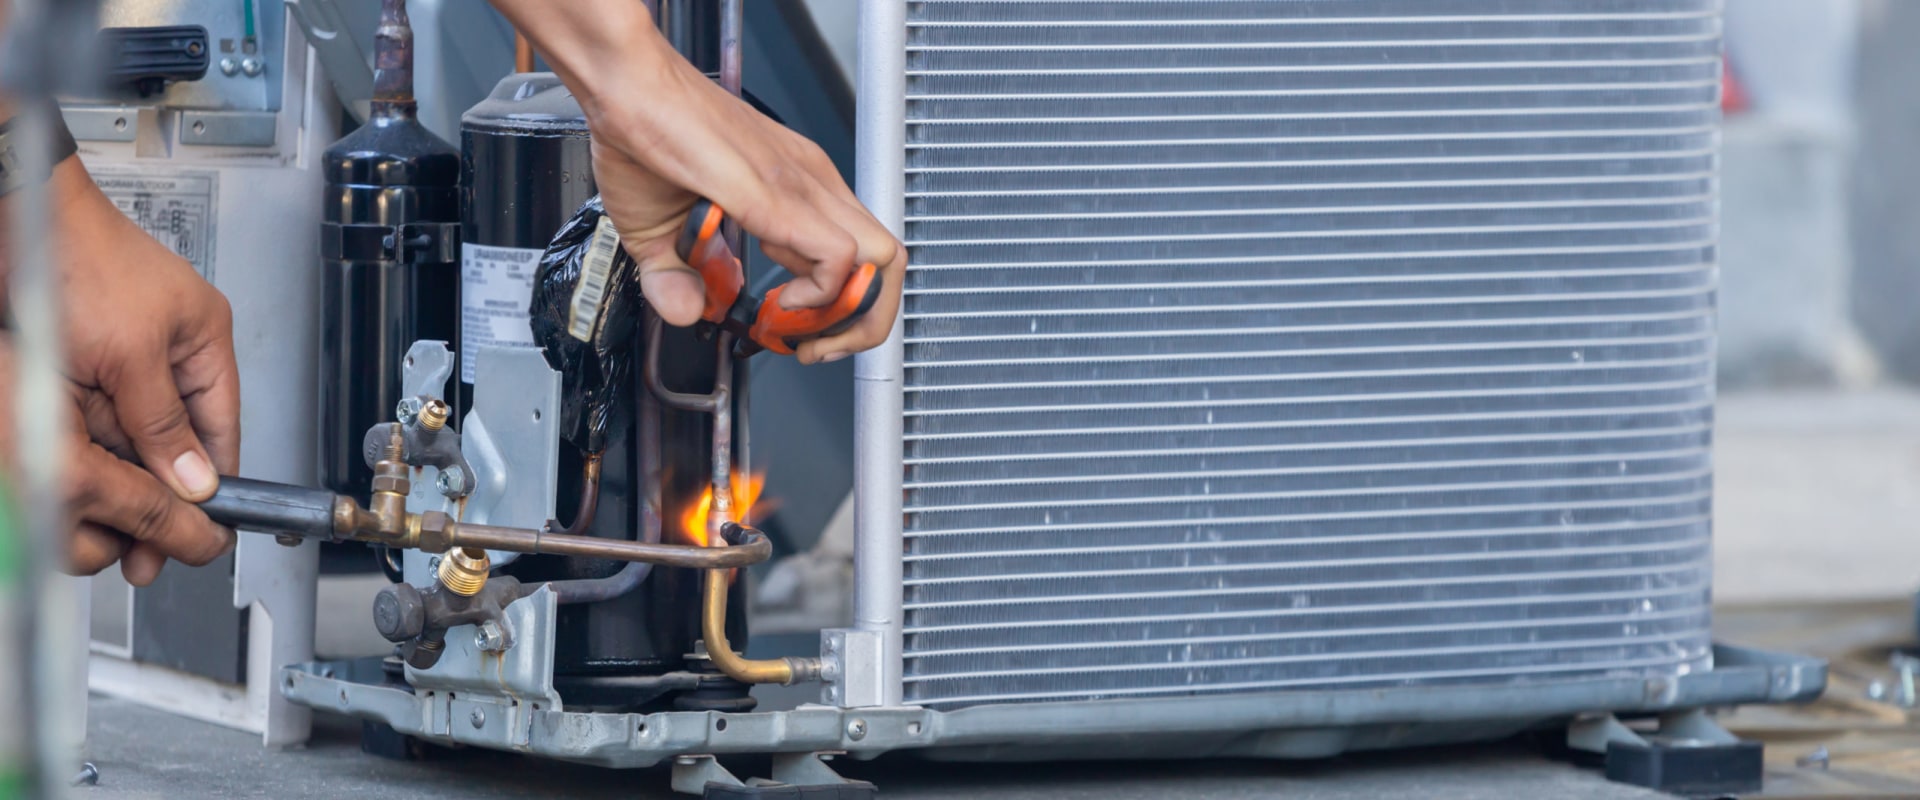 How to Find a Reliable AC Replacement Service